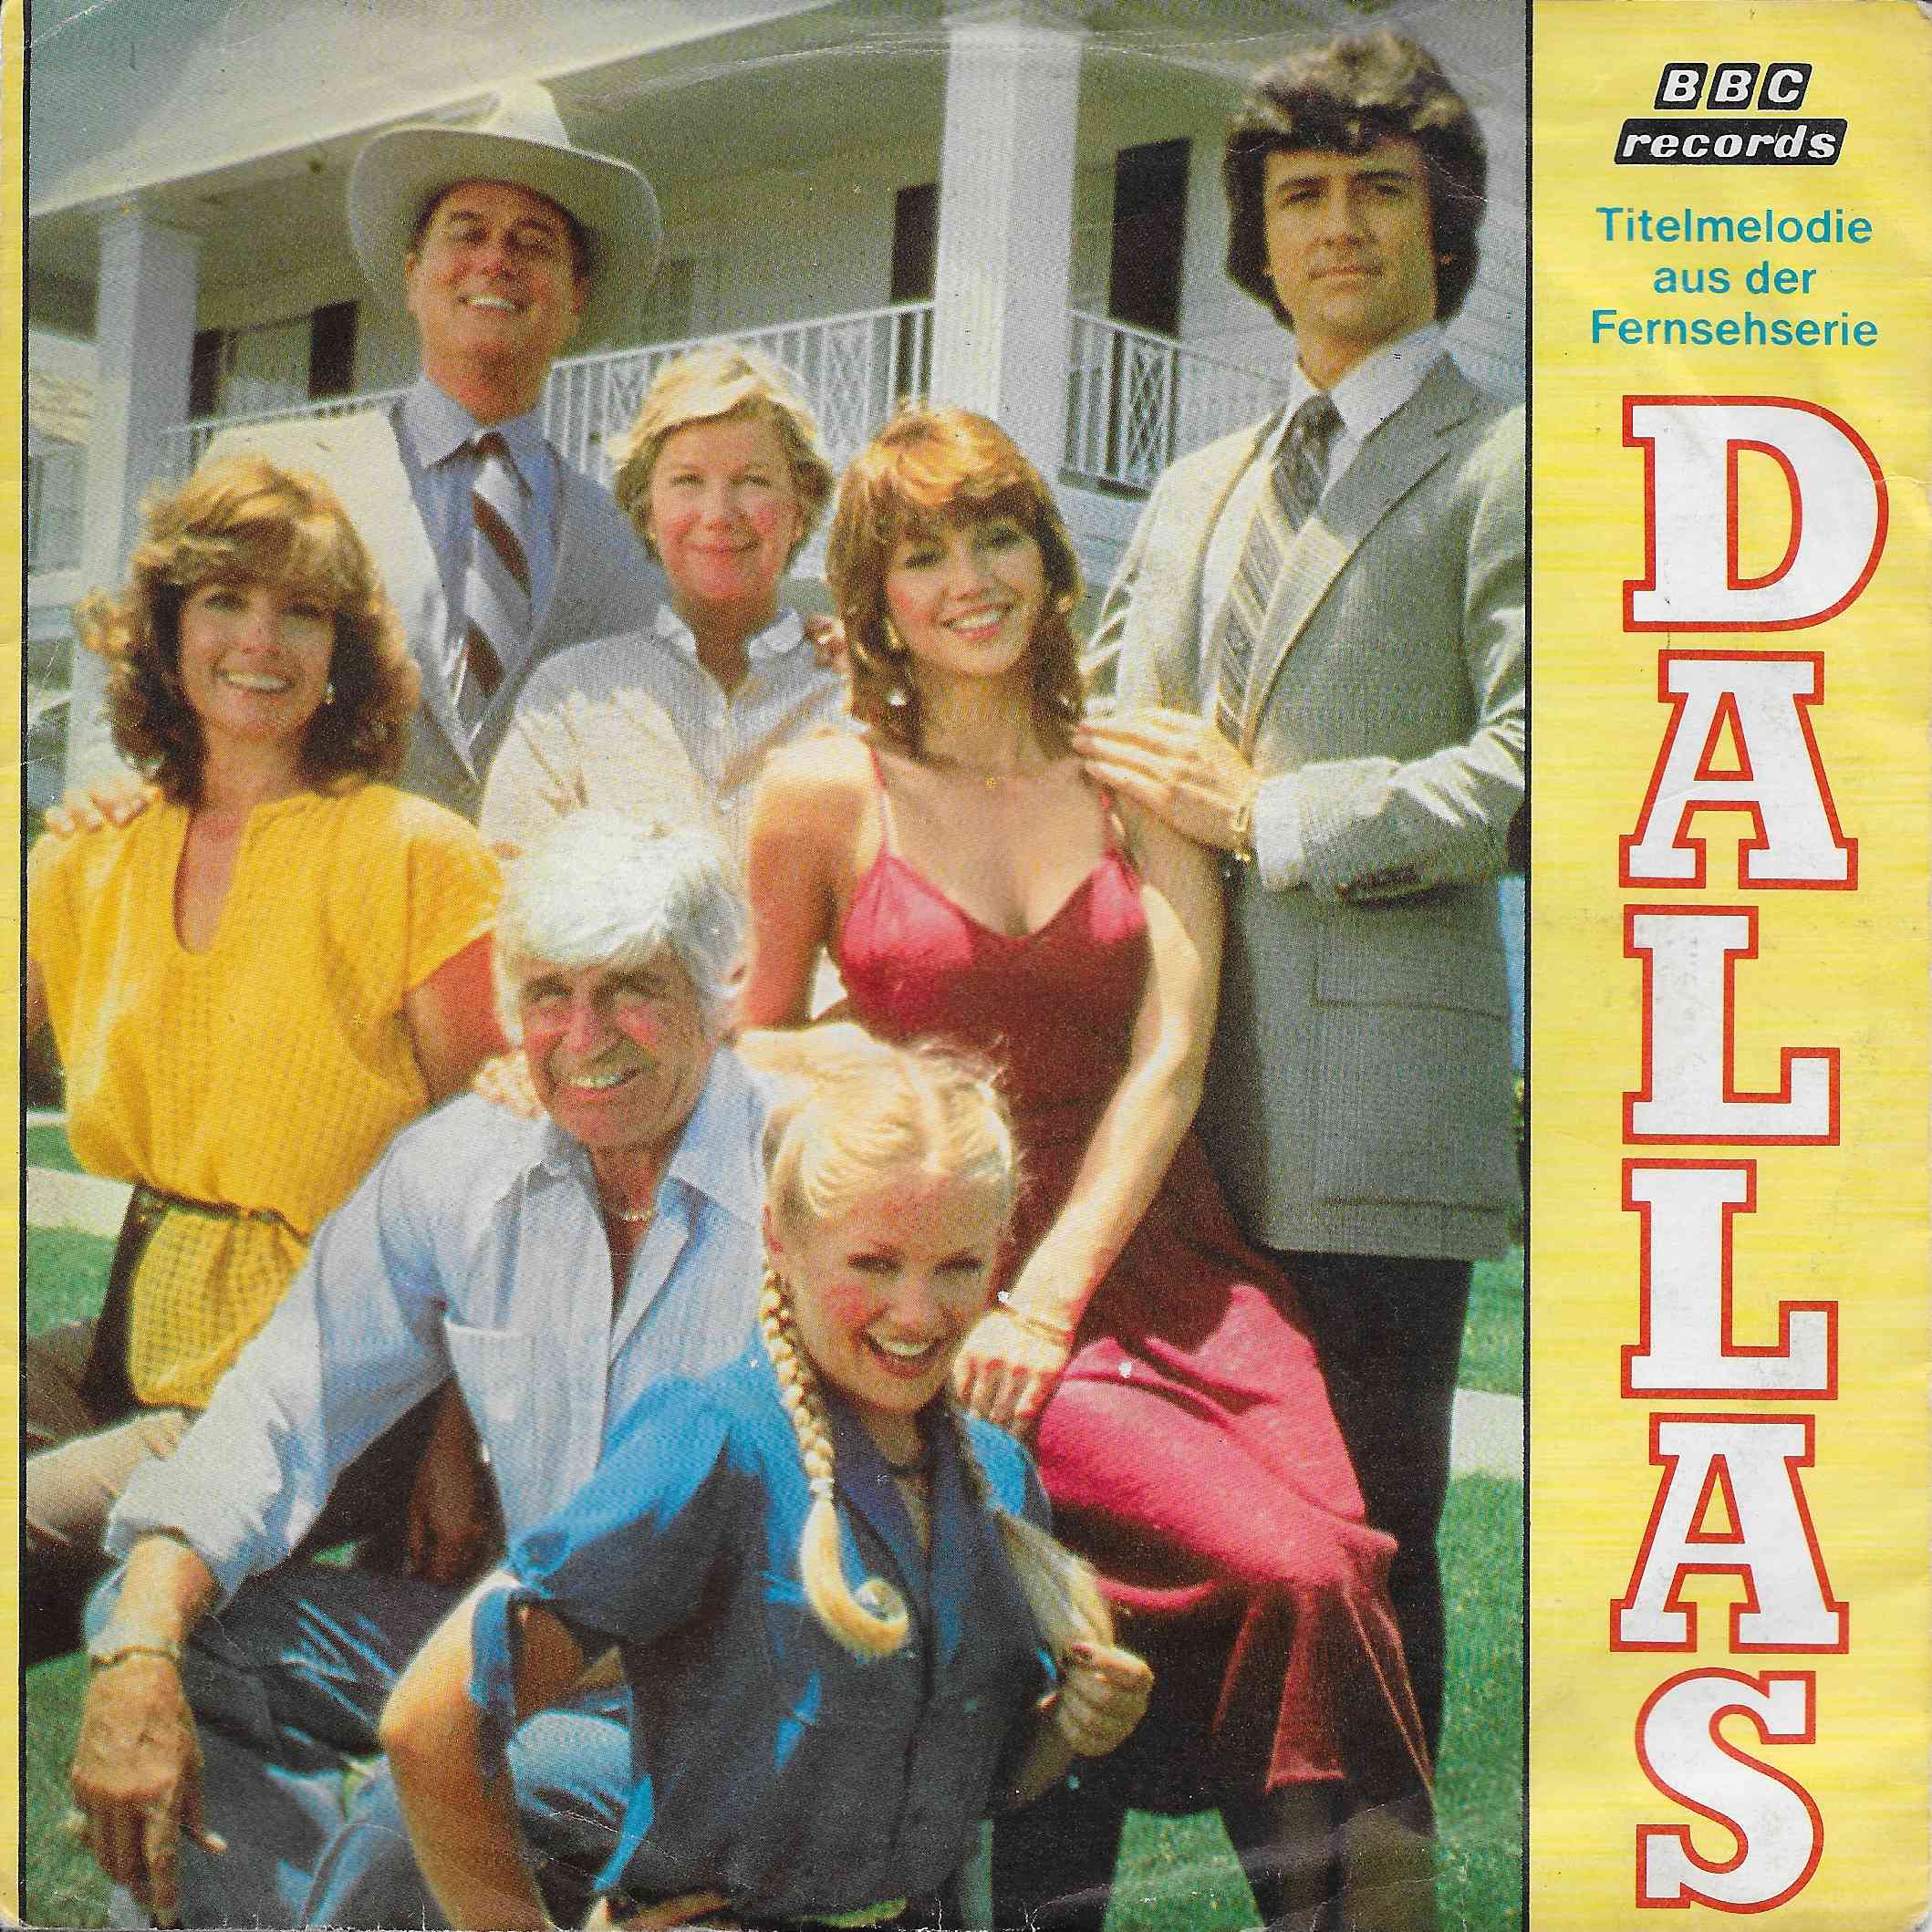 Picture of INT 113.007 Dallas (German import) by artist Jerrold Immel from the BBC singles - Records and Tapes library